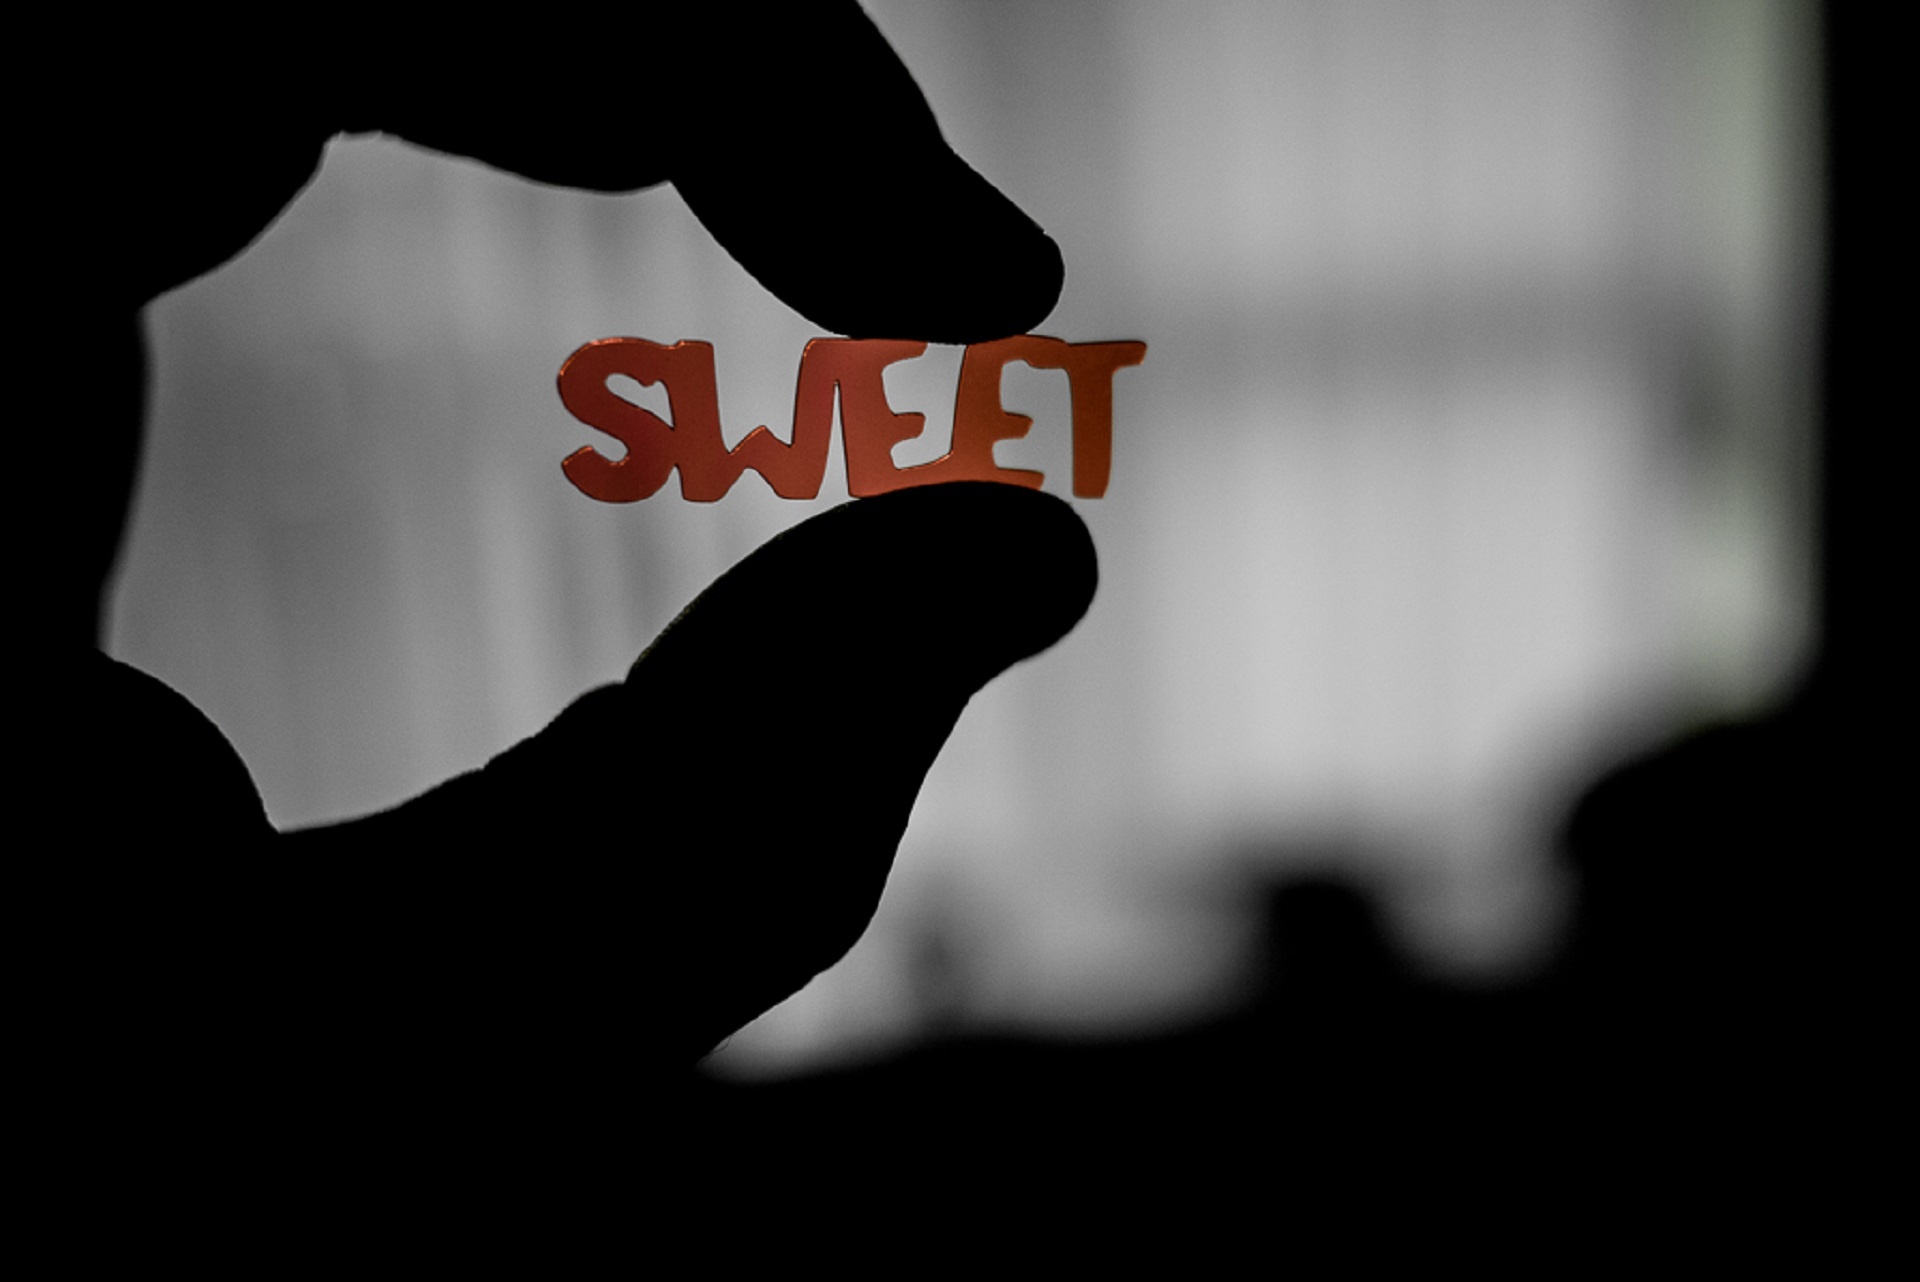 word sweet message hand free photo